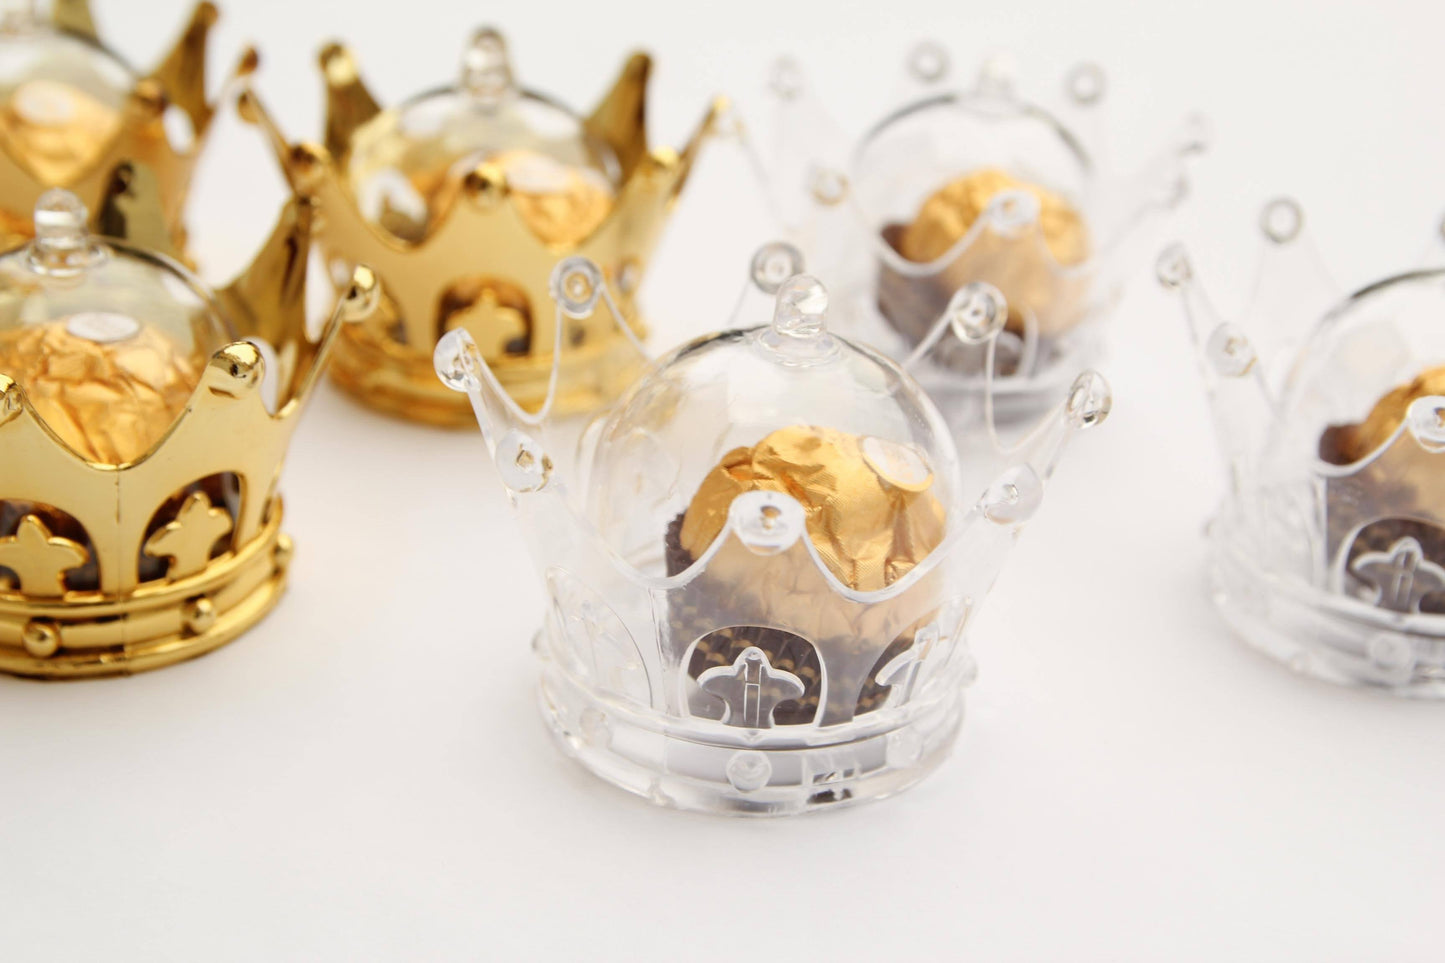 Acrylic Crown Candy & Treats Favor Containers (12 pcs)